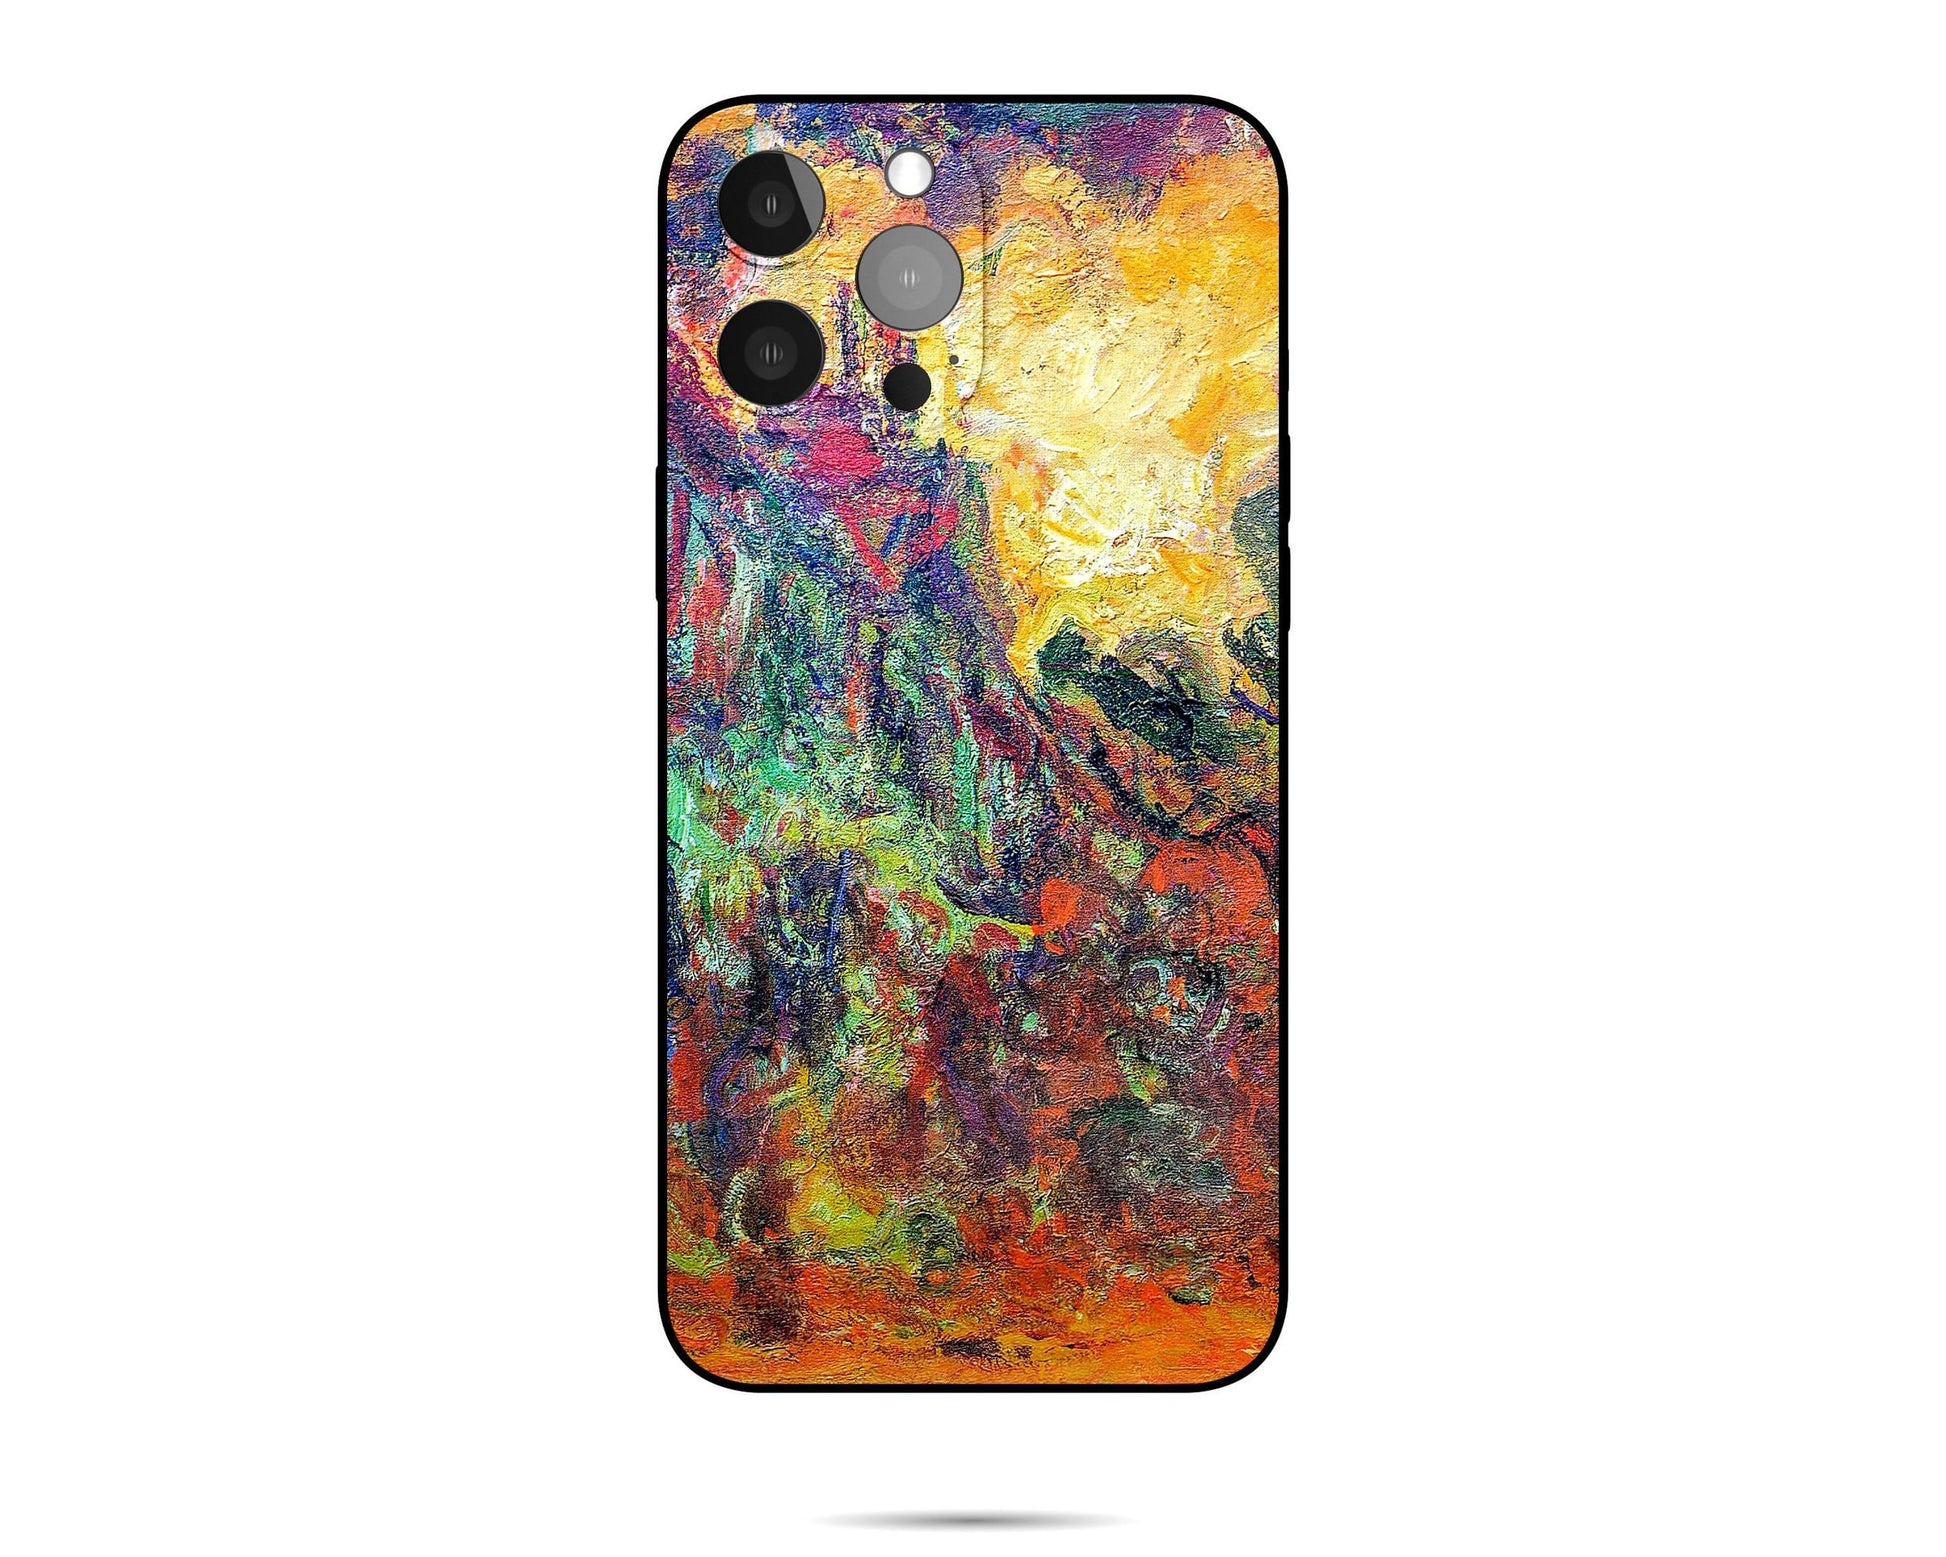 Claude Monet Famous Painting Iphone 14 Pro Max Cases, Iphone 13 Pro Case, Iphone 7 Plus Case, Iphone 8 Plus Case Art, Gift For Her, Silicone